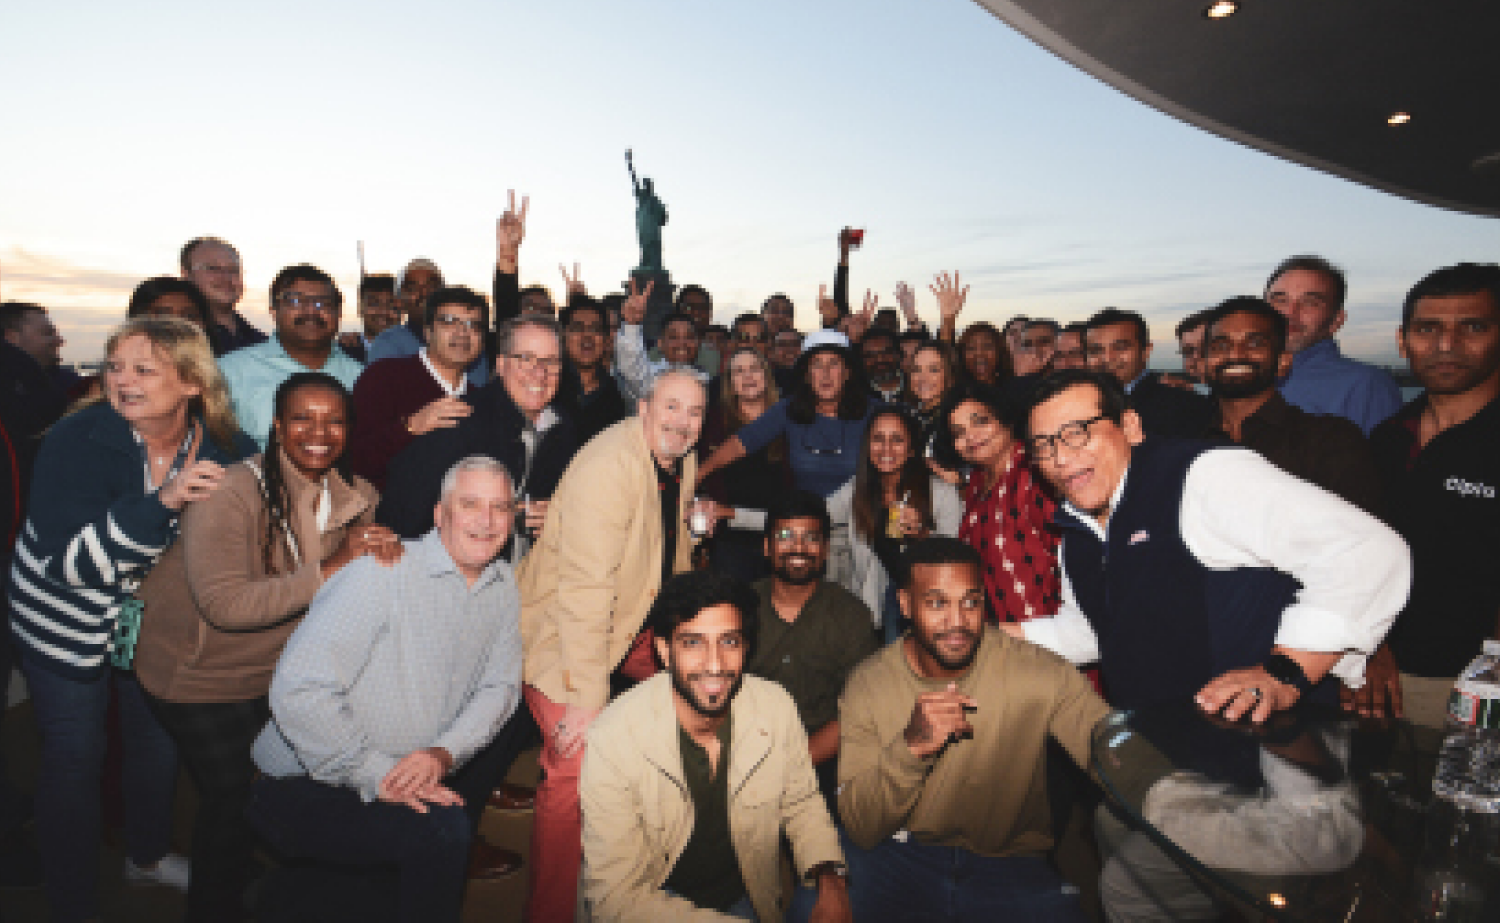 Cipla US teams get together to celebrate our record-breaking performance by sailing on the Hudson NY cruise ship